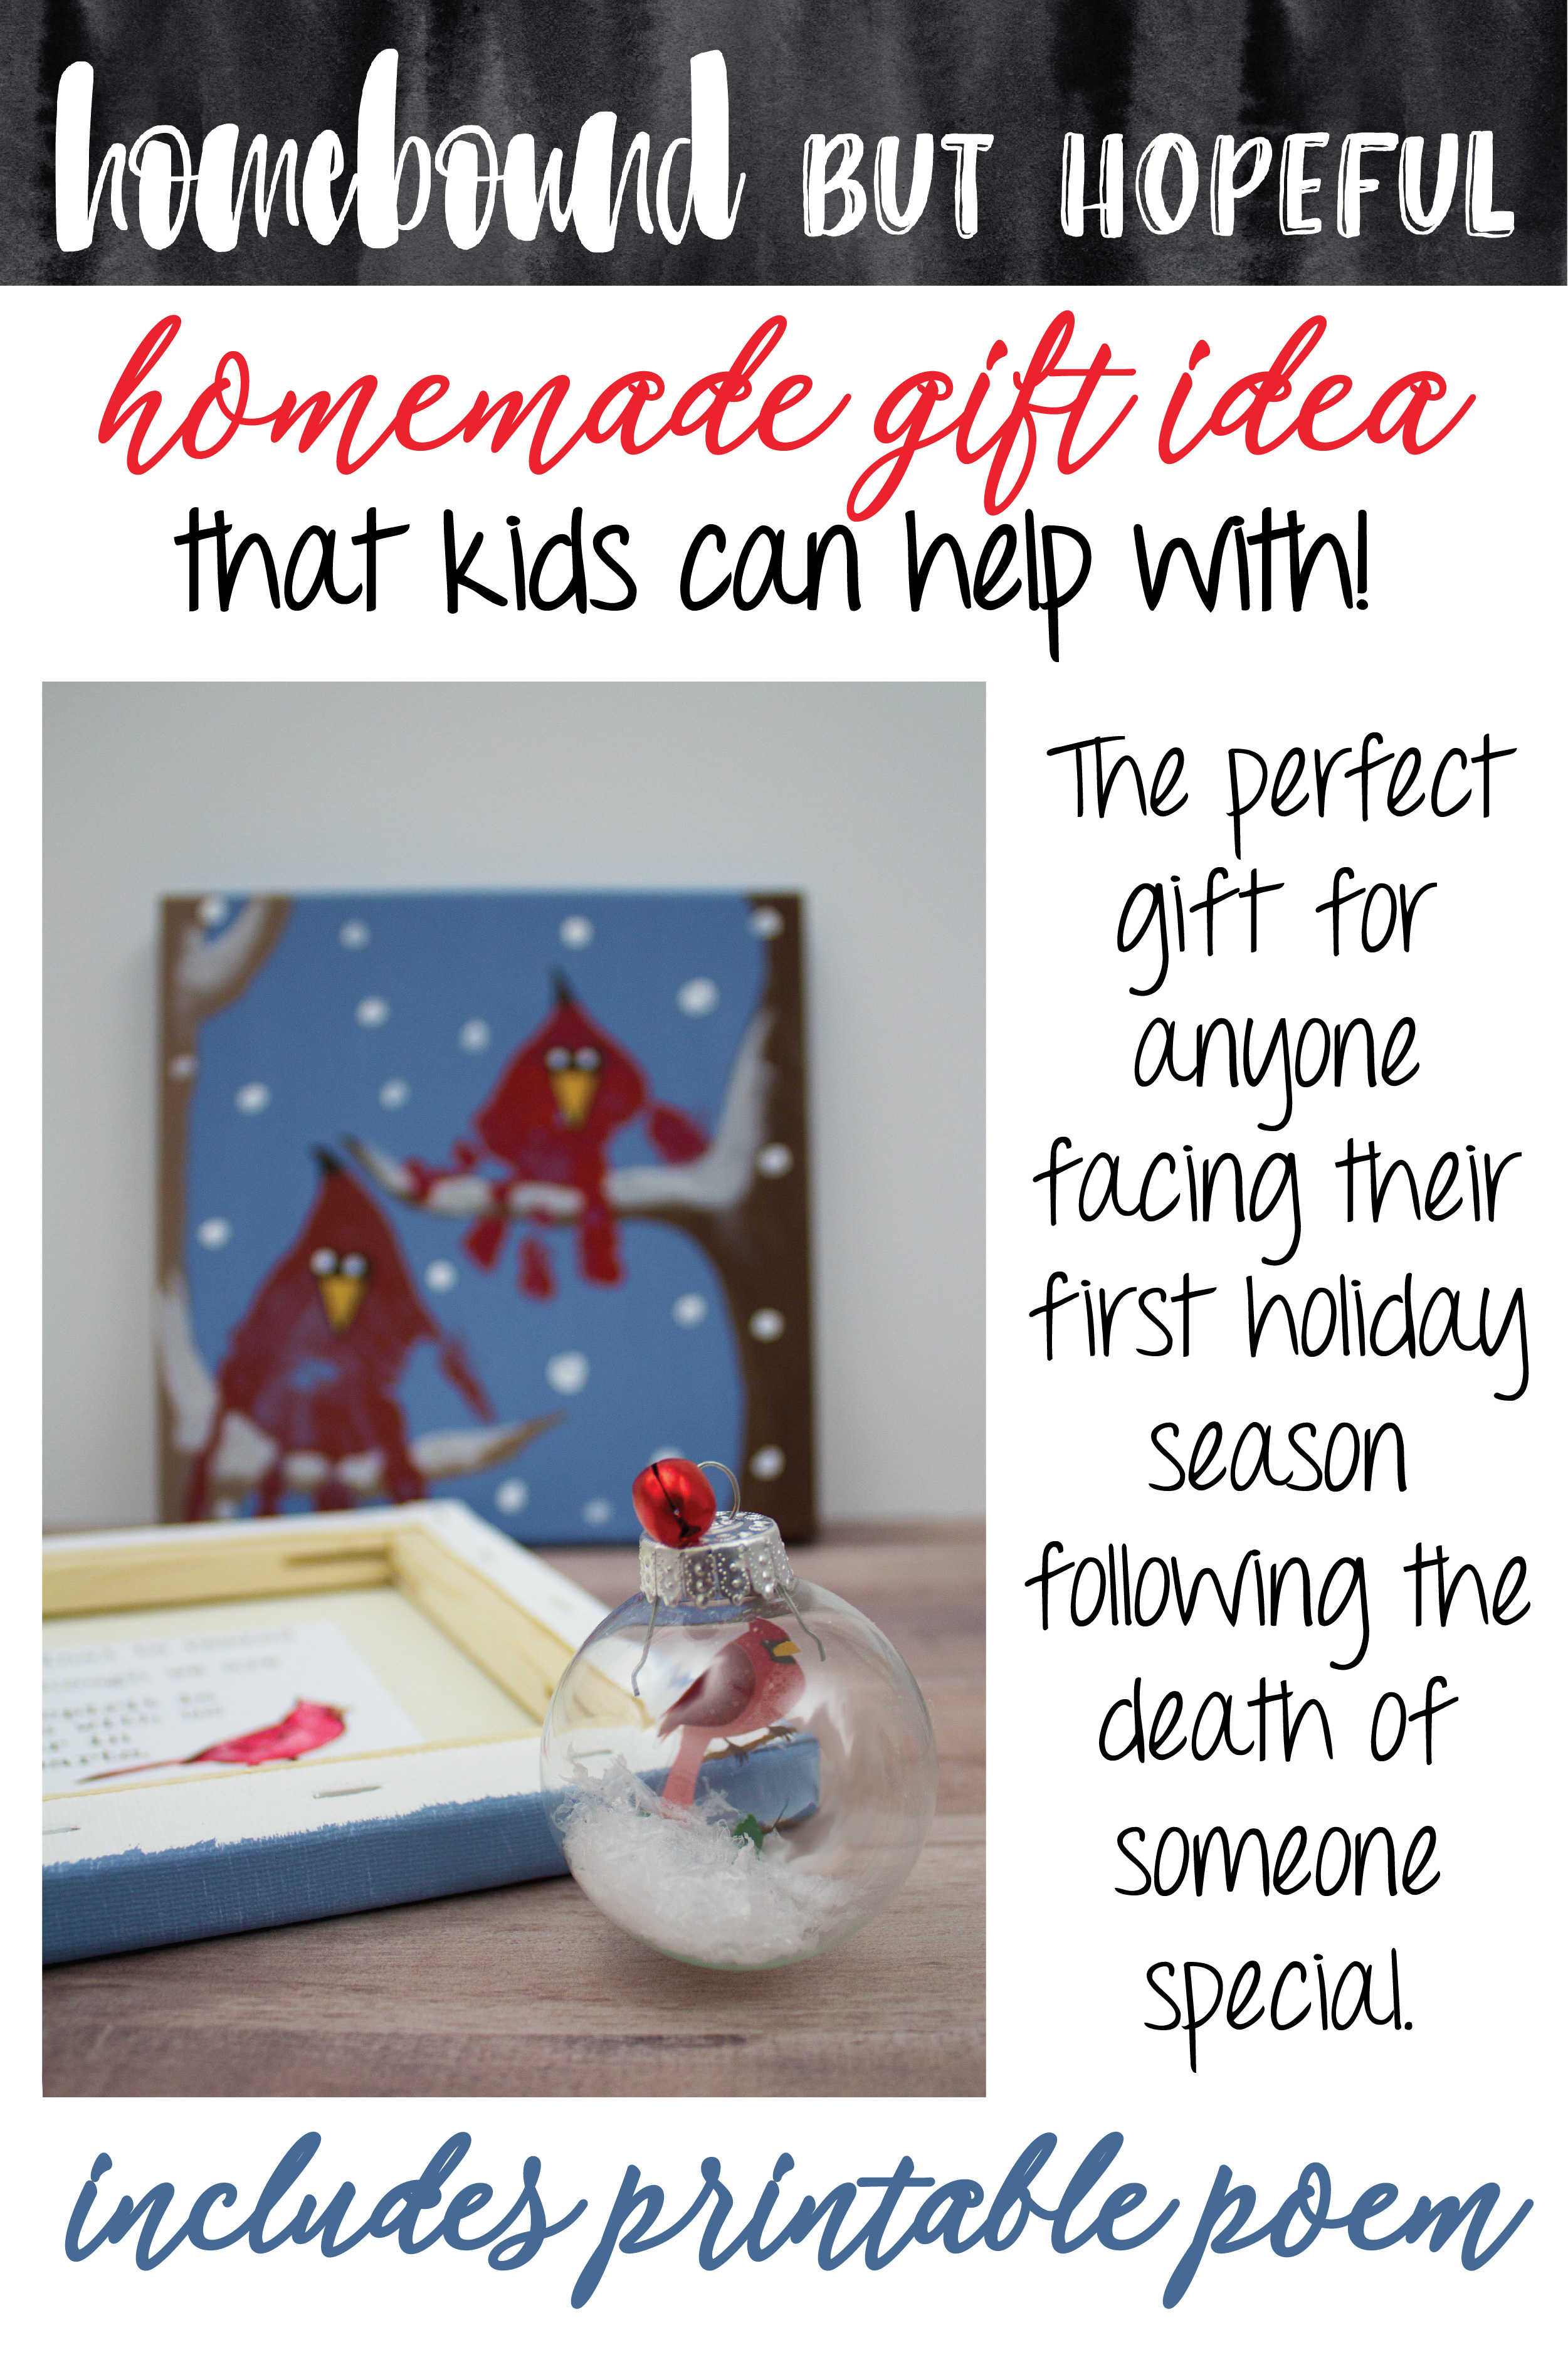 Holidays following the loss of a loved one can be extra difficult... I'm sharing the special gift my kids and I are making for our family members after a particularly difficult year.